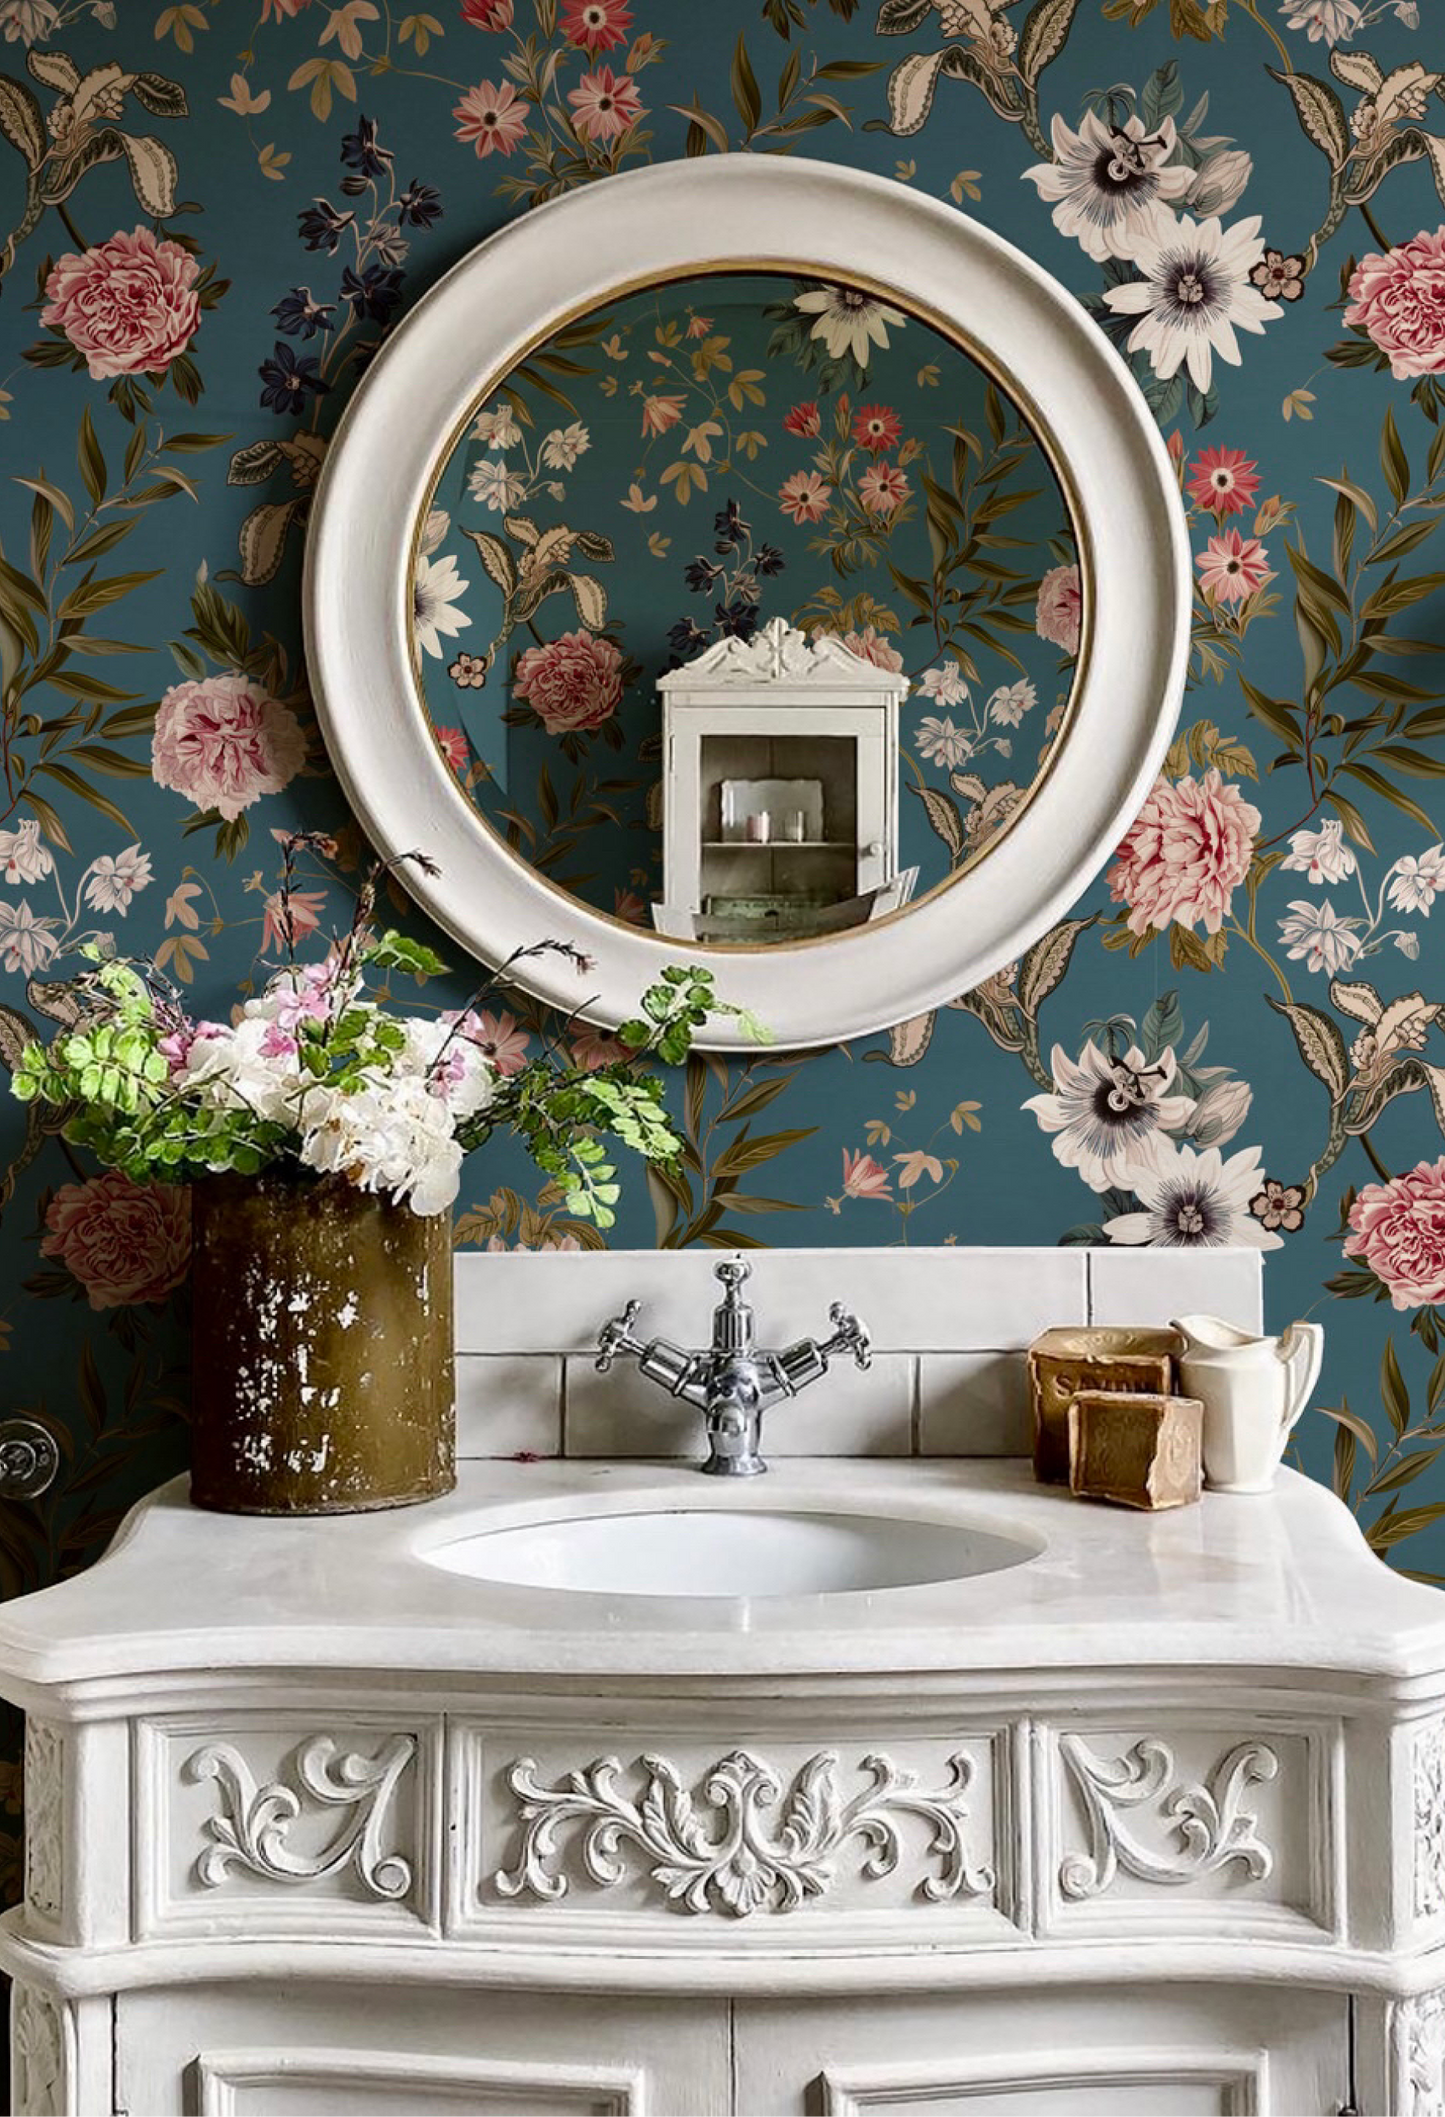 Luxury bathroom with mirror reflecting blue floral Beechcroft Garden Wallpaper in Cerulean on the walls from Deus ex Gardenia. Photo by The Introverts Home